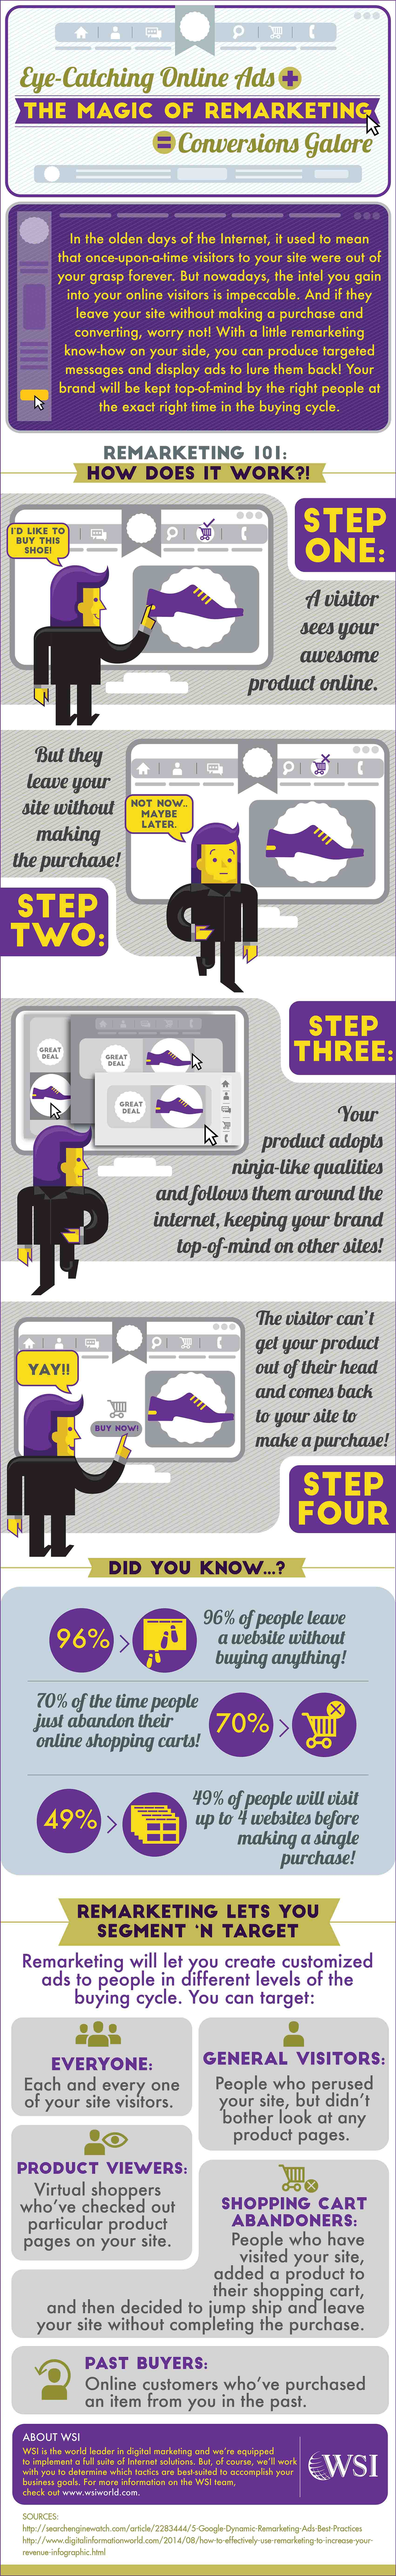 What is remarketing? This infographic explains the concept of remarketing in digital marketing